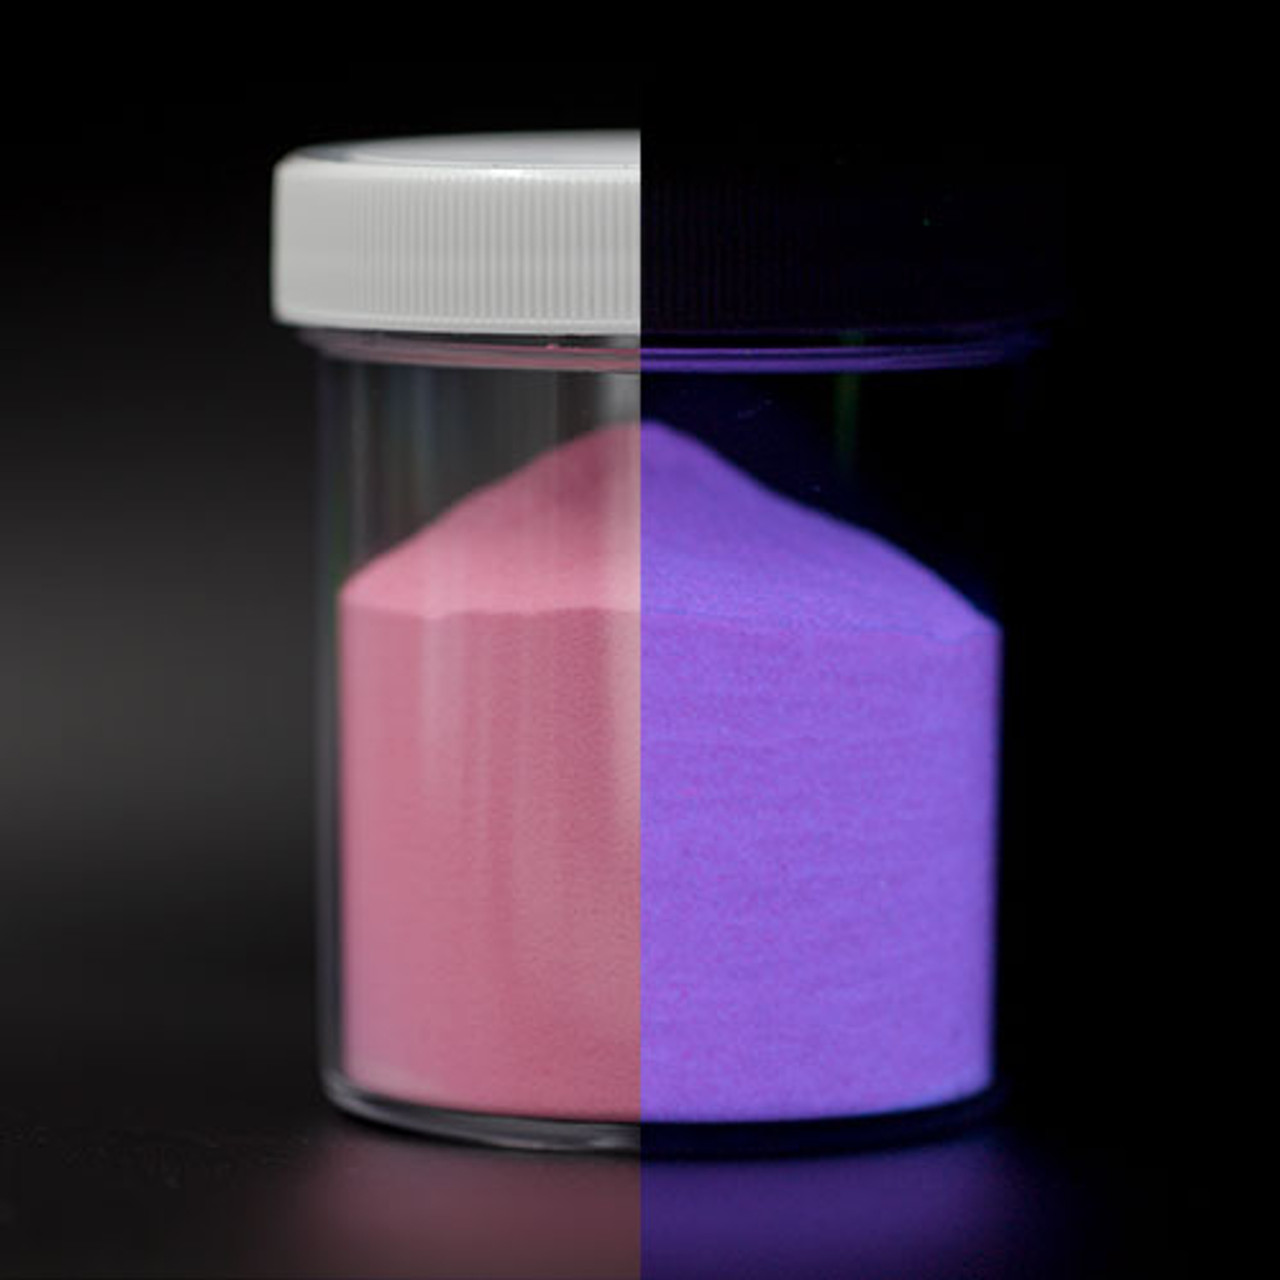 Glow in the Dark Pigment Powders, aluminates, day visible, glow in the  dark and more